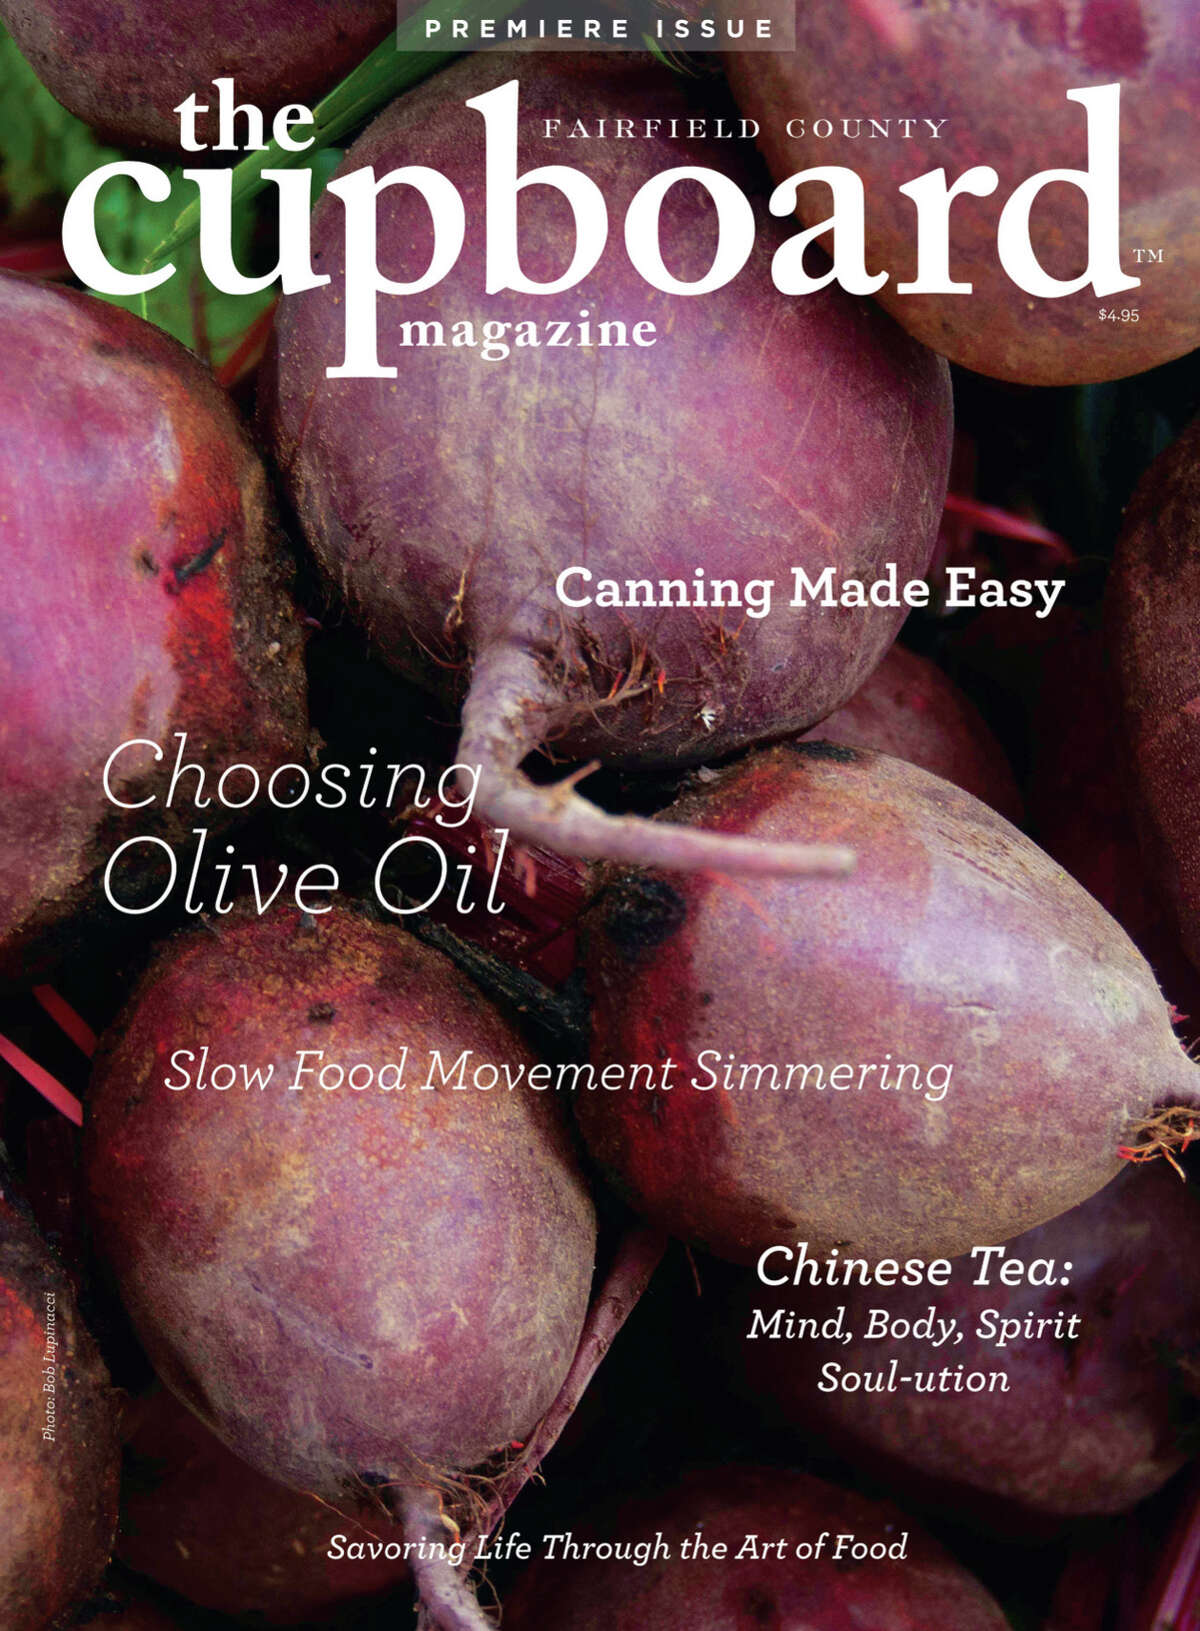 The Cupboard Magazine, a locally-focused food publication launched this month with direct delivery copies to 20,000 Fairfield County residents. Publisher Lori Levenson Bailey and editor-in-chief Bob Lupinacci head up the magazineâÄôs team of freelance writers and photographers.